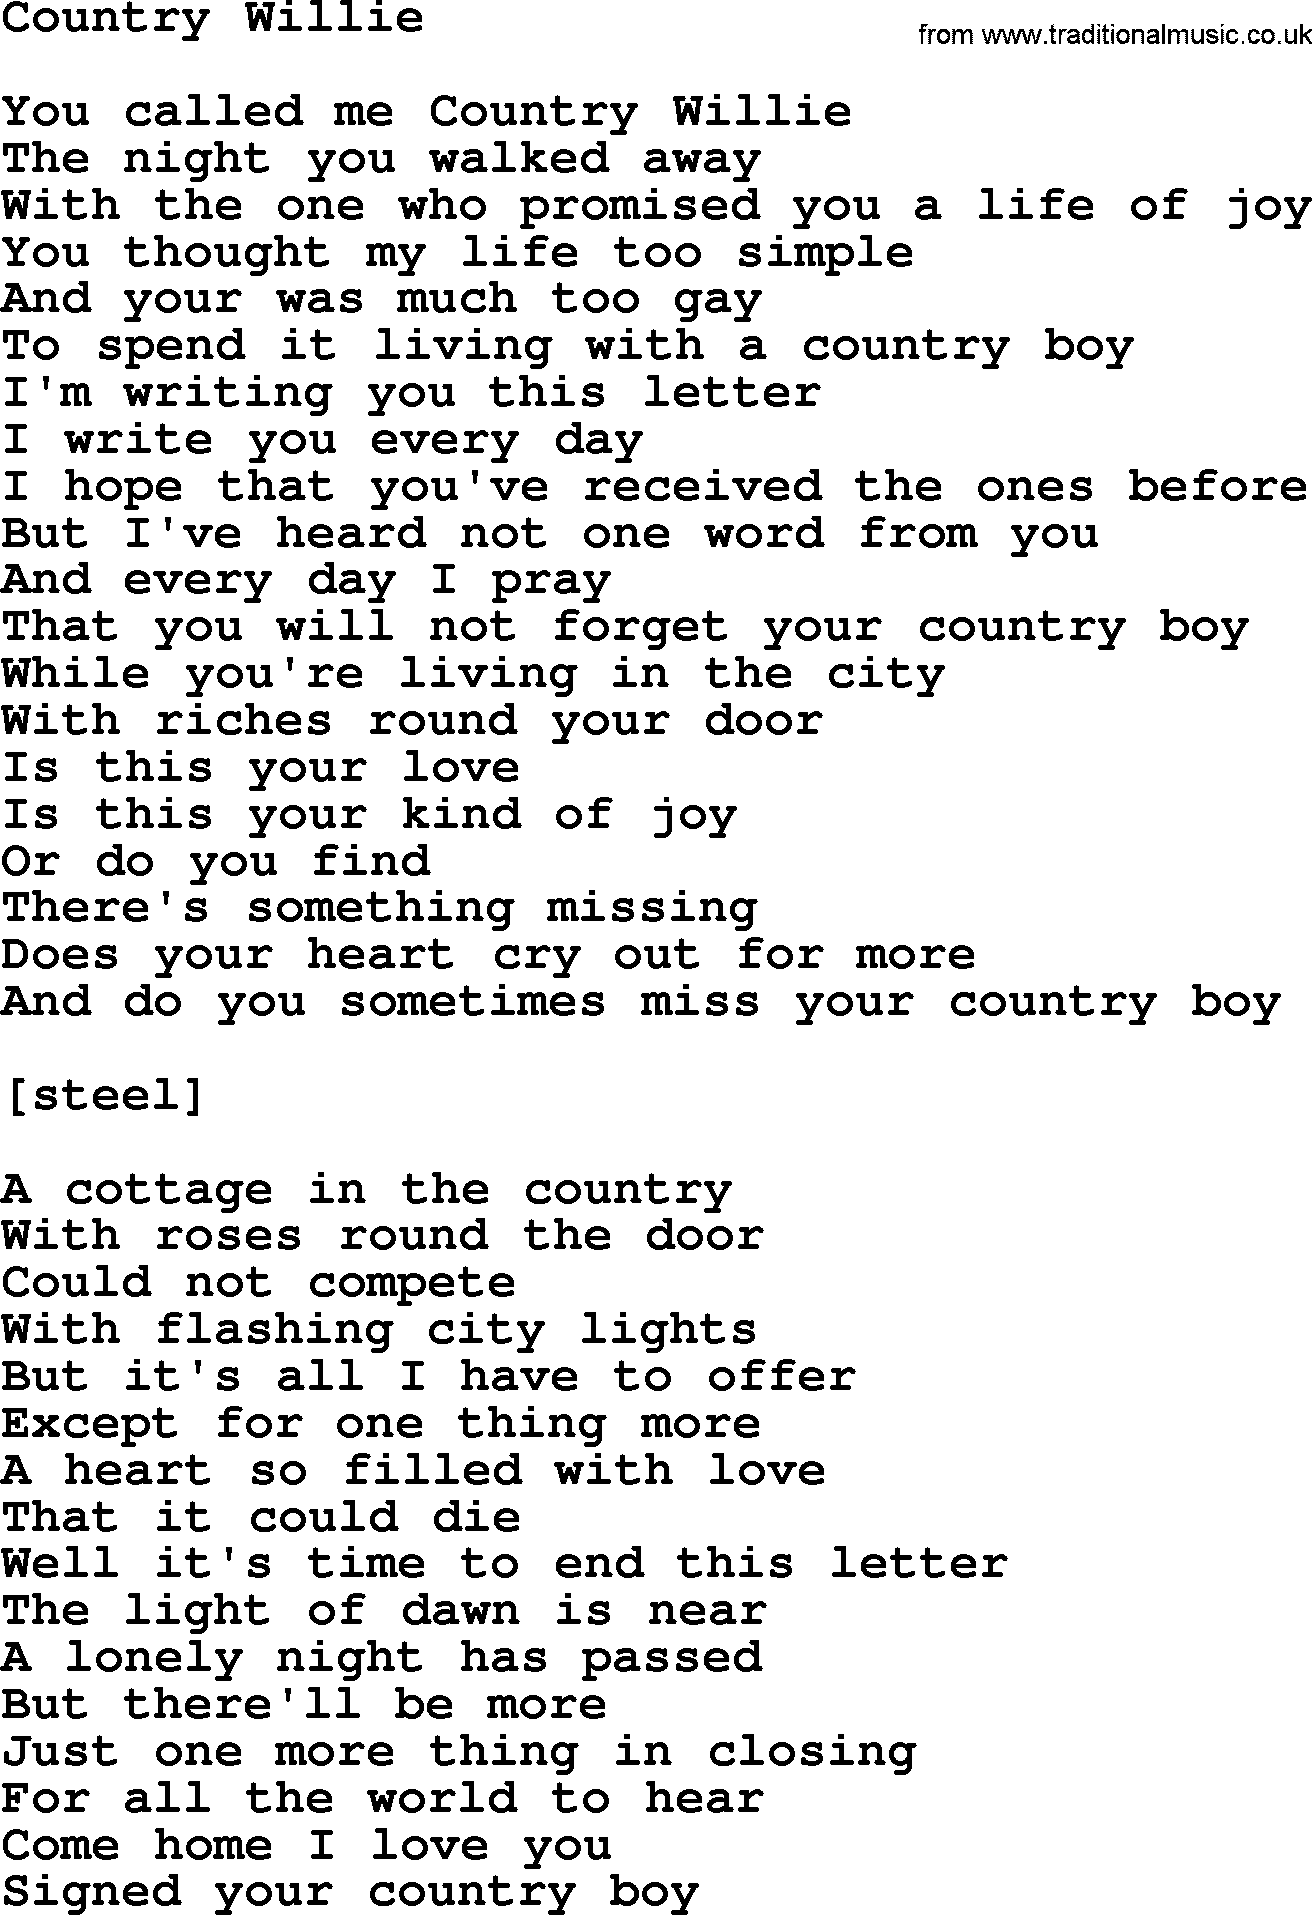 Willie Nelson song: Country Willie lyrics